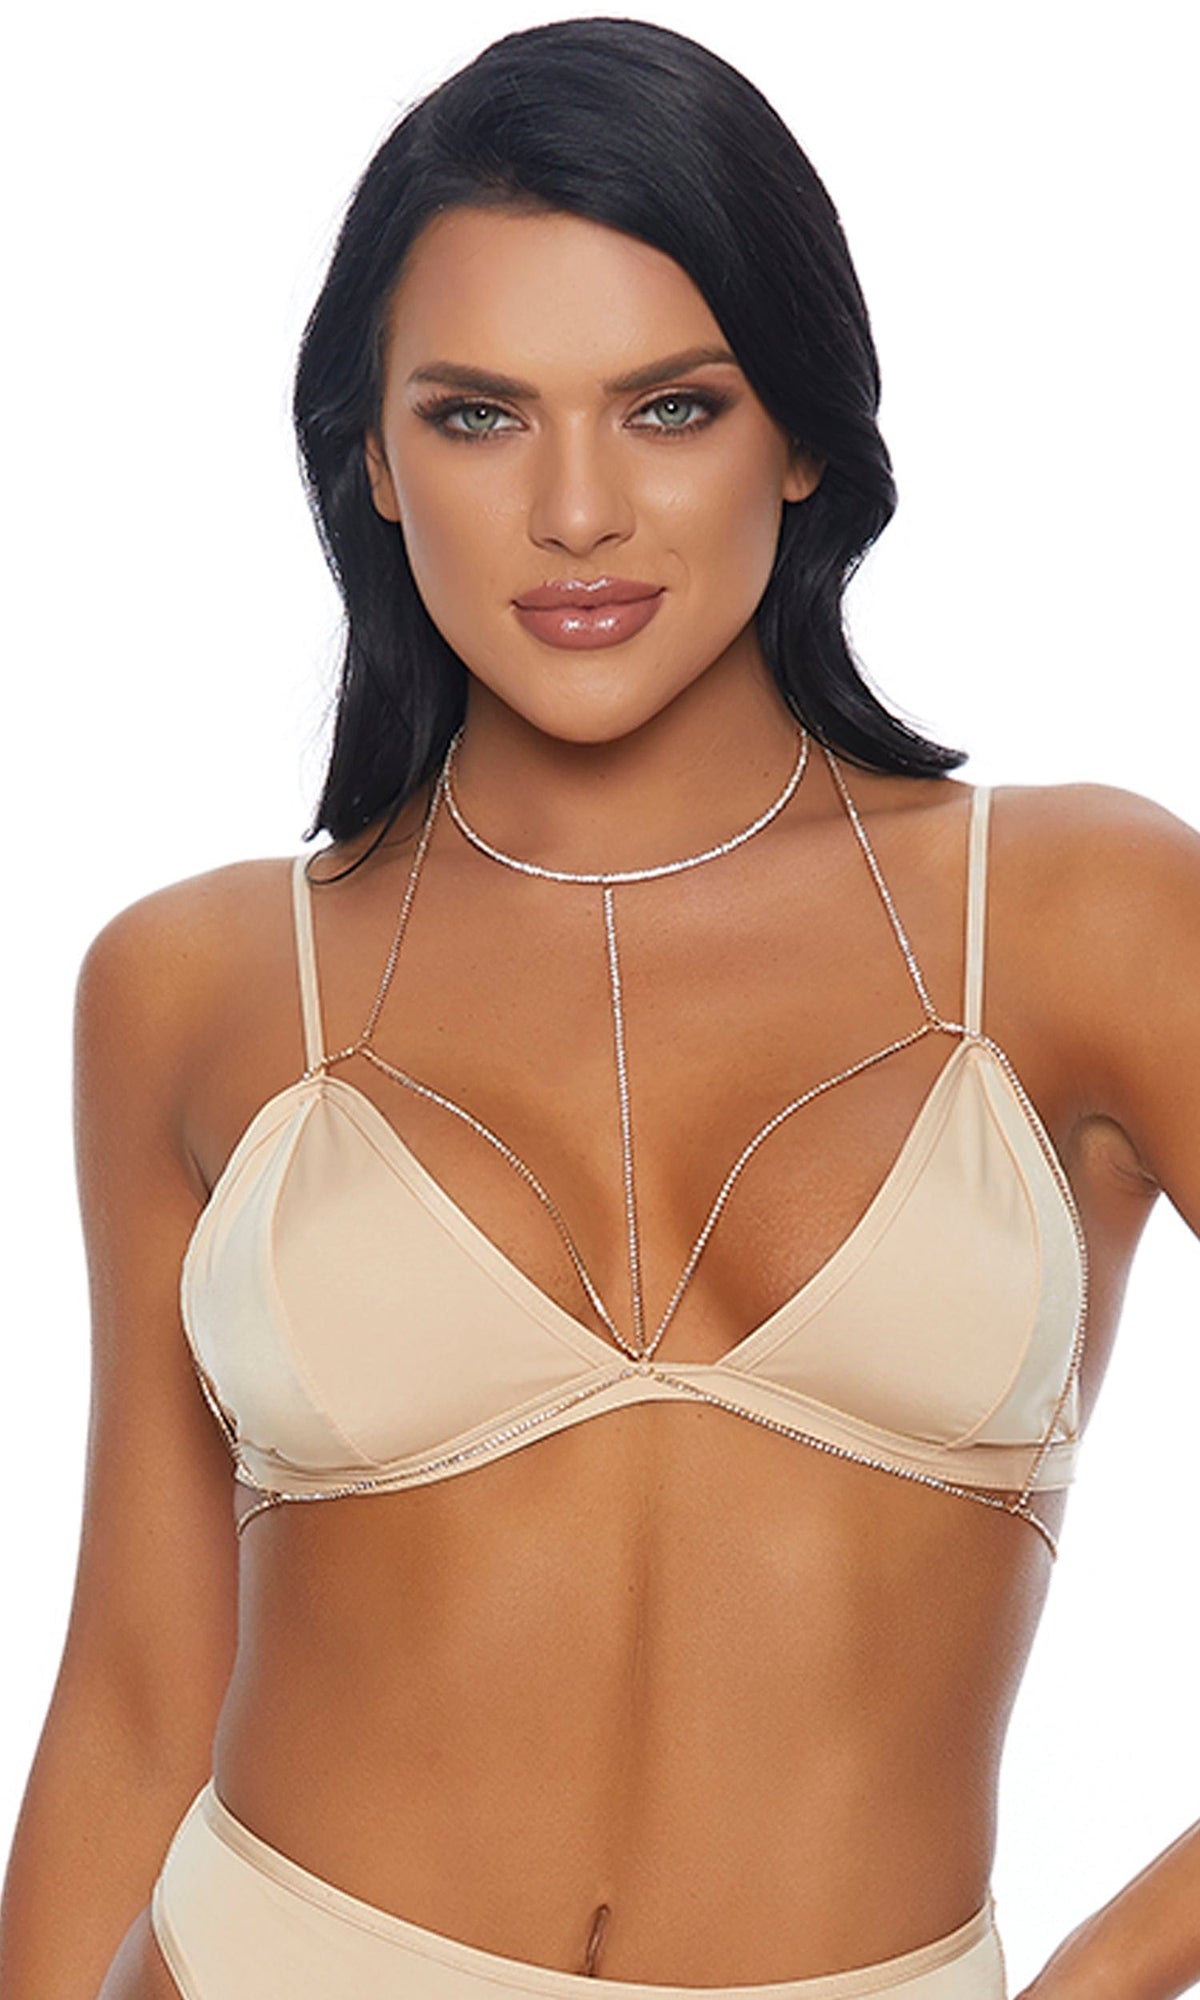 Forplay One Size / Gold Gold Diamonds Dancing Rhinestone Bra SHC-997988-O/S-FP 2022 Gold Diamonds Dancing Rhinestone Bra Forplay 997988 Apparel &amp; Accessories &gt; Clothing &gt; Underwear &amp; Socks &gt; Lingerie